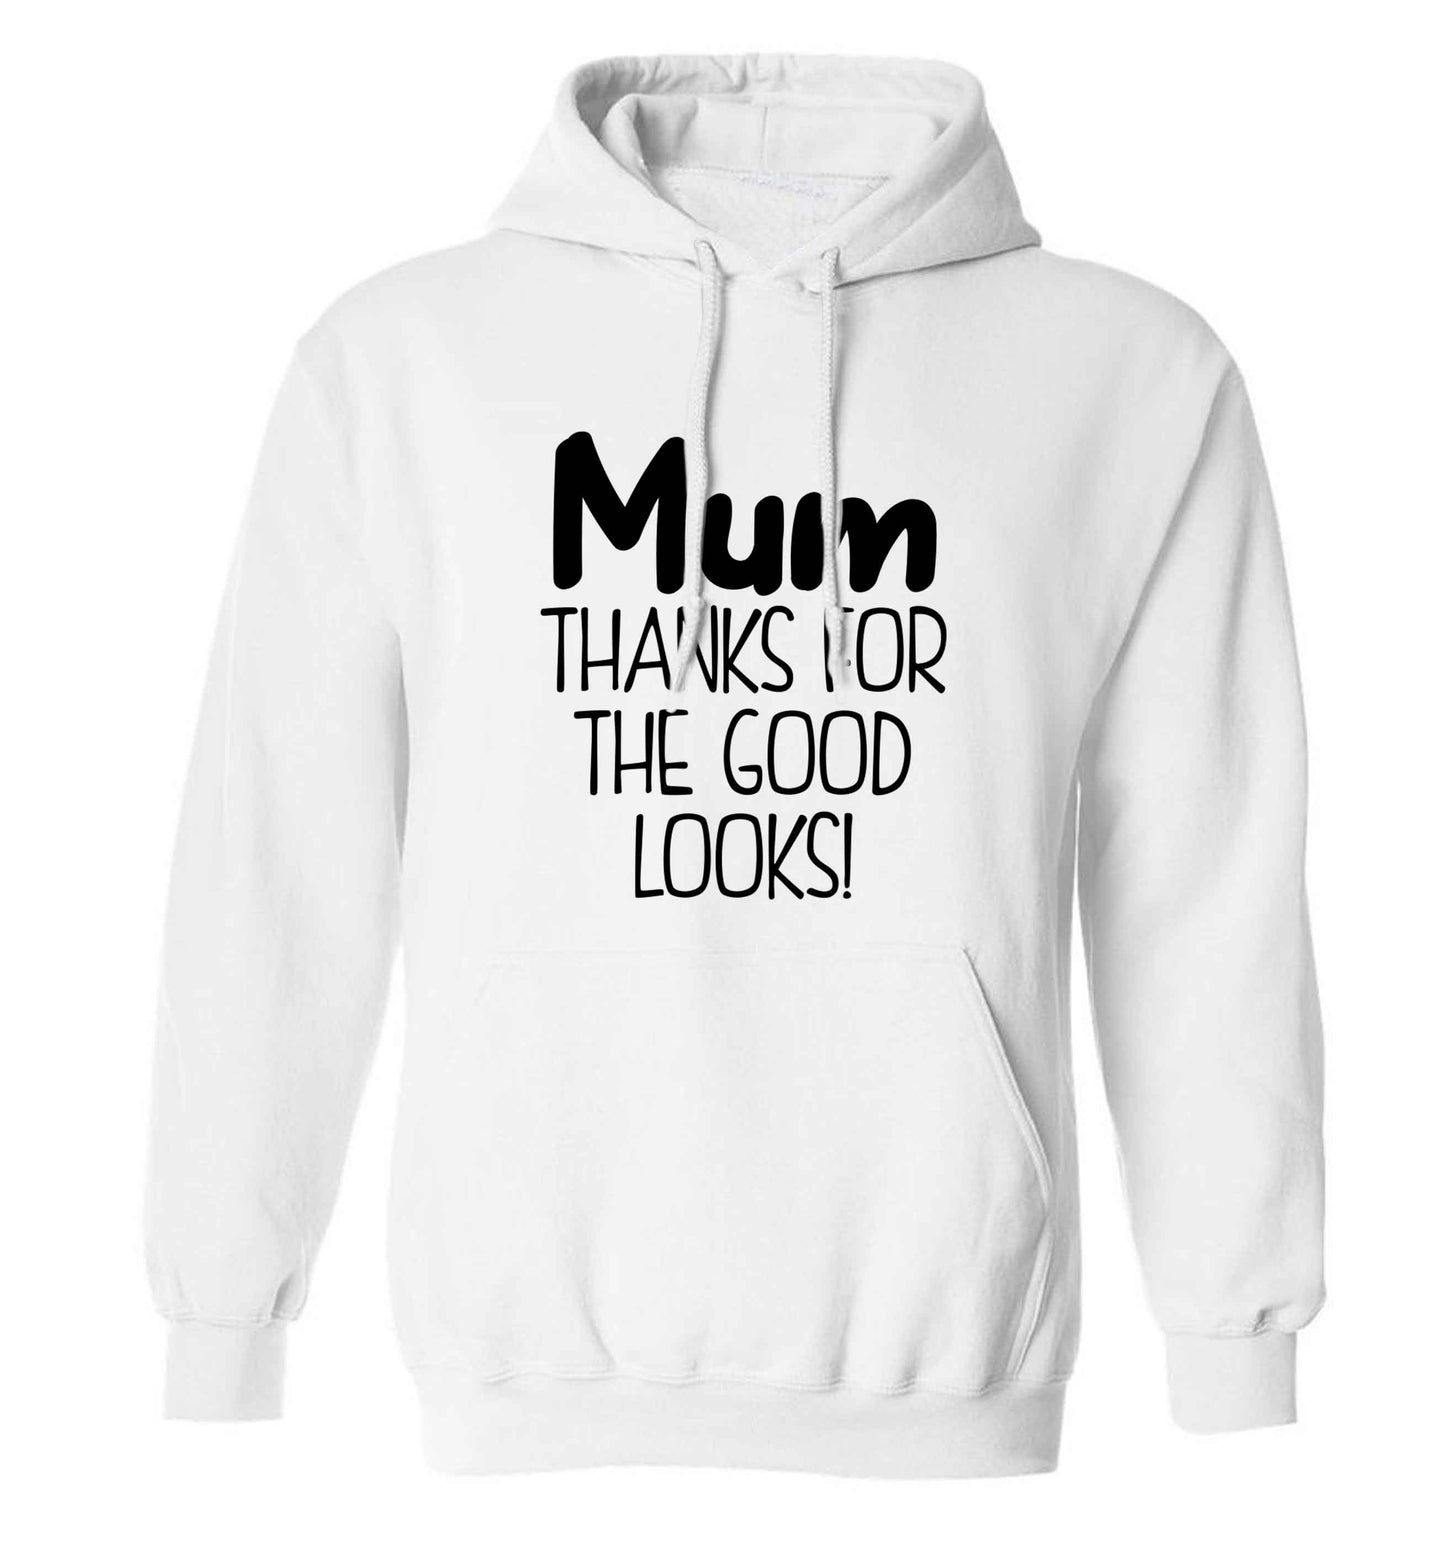 Mum thanks for the good looks! adults unisex white hoodie 2XL